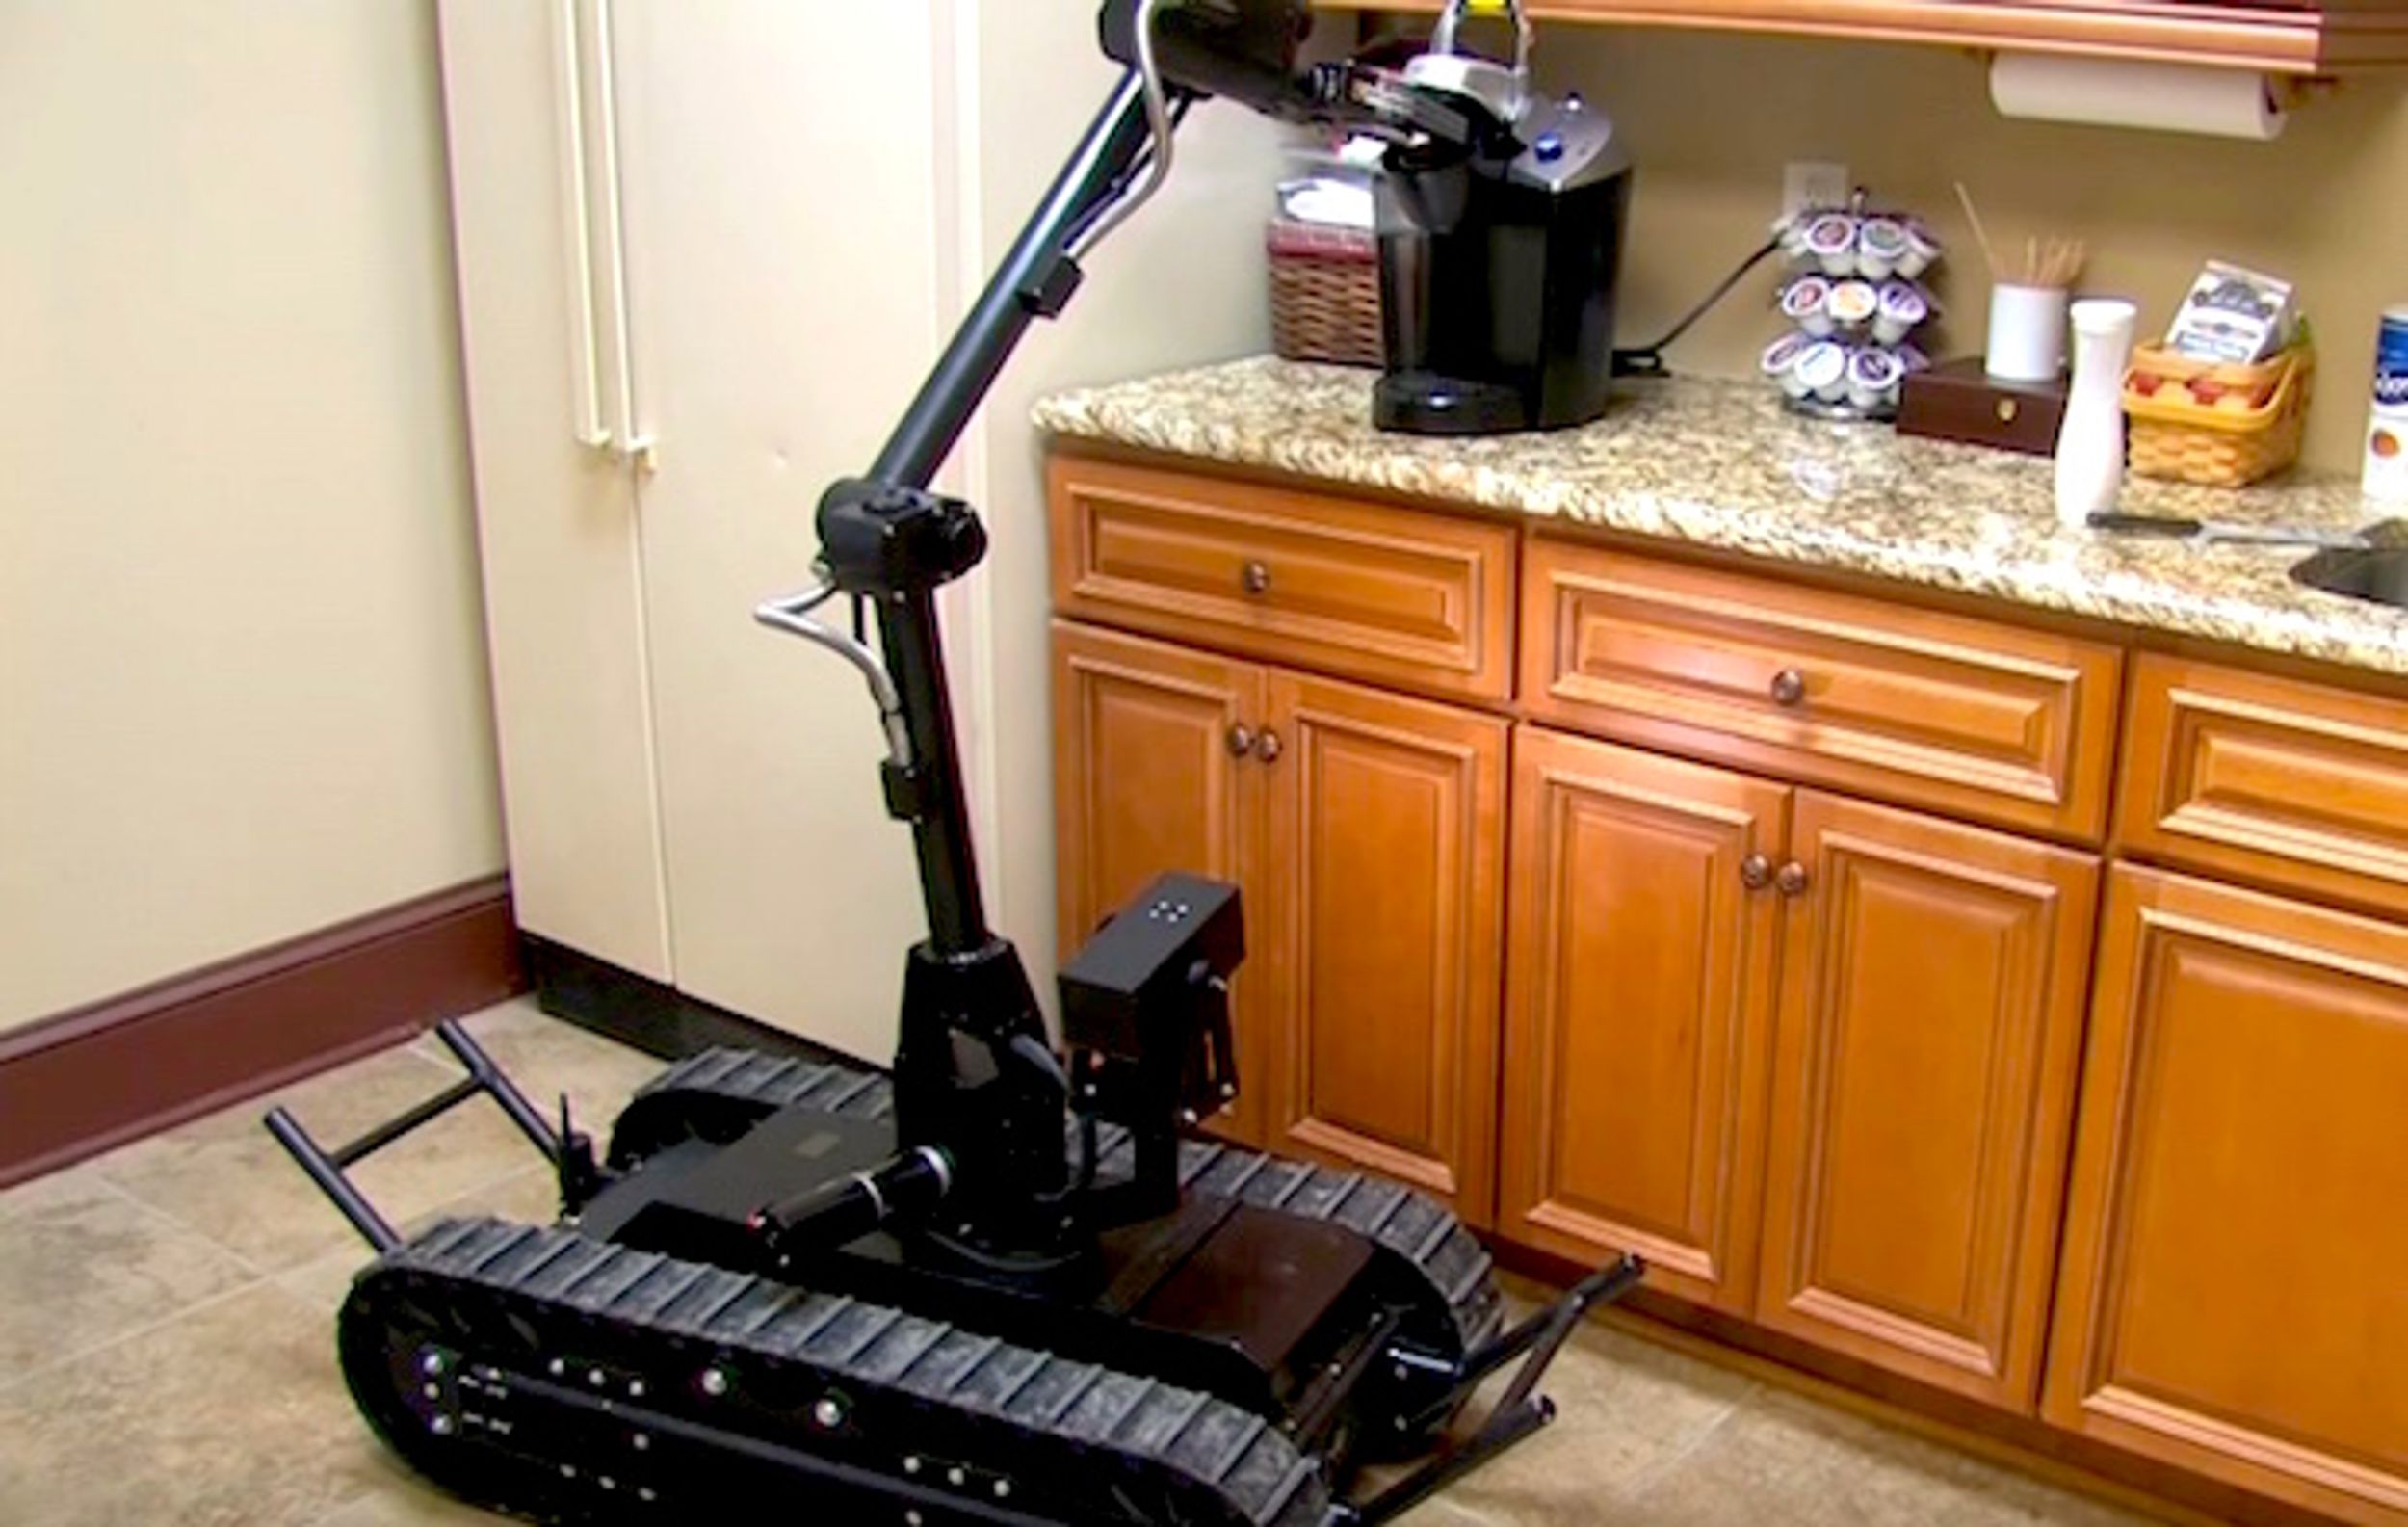 Video Friday: Robot Gets Coffee, Drone in a Box, and Self-Driving Chairs